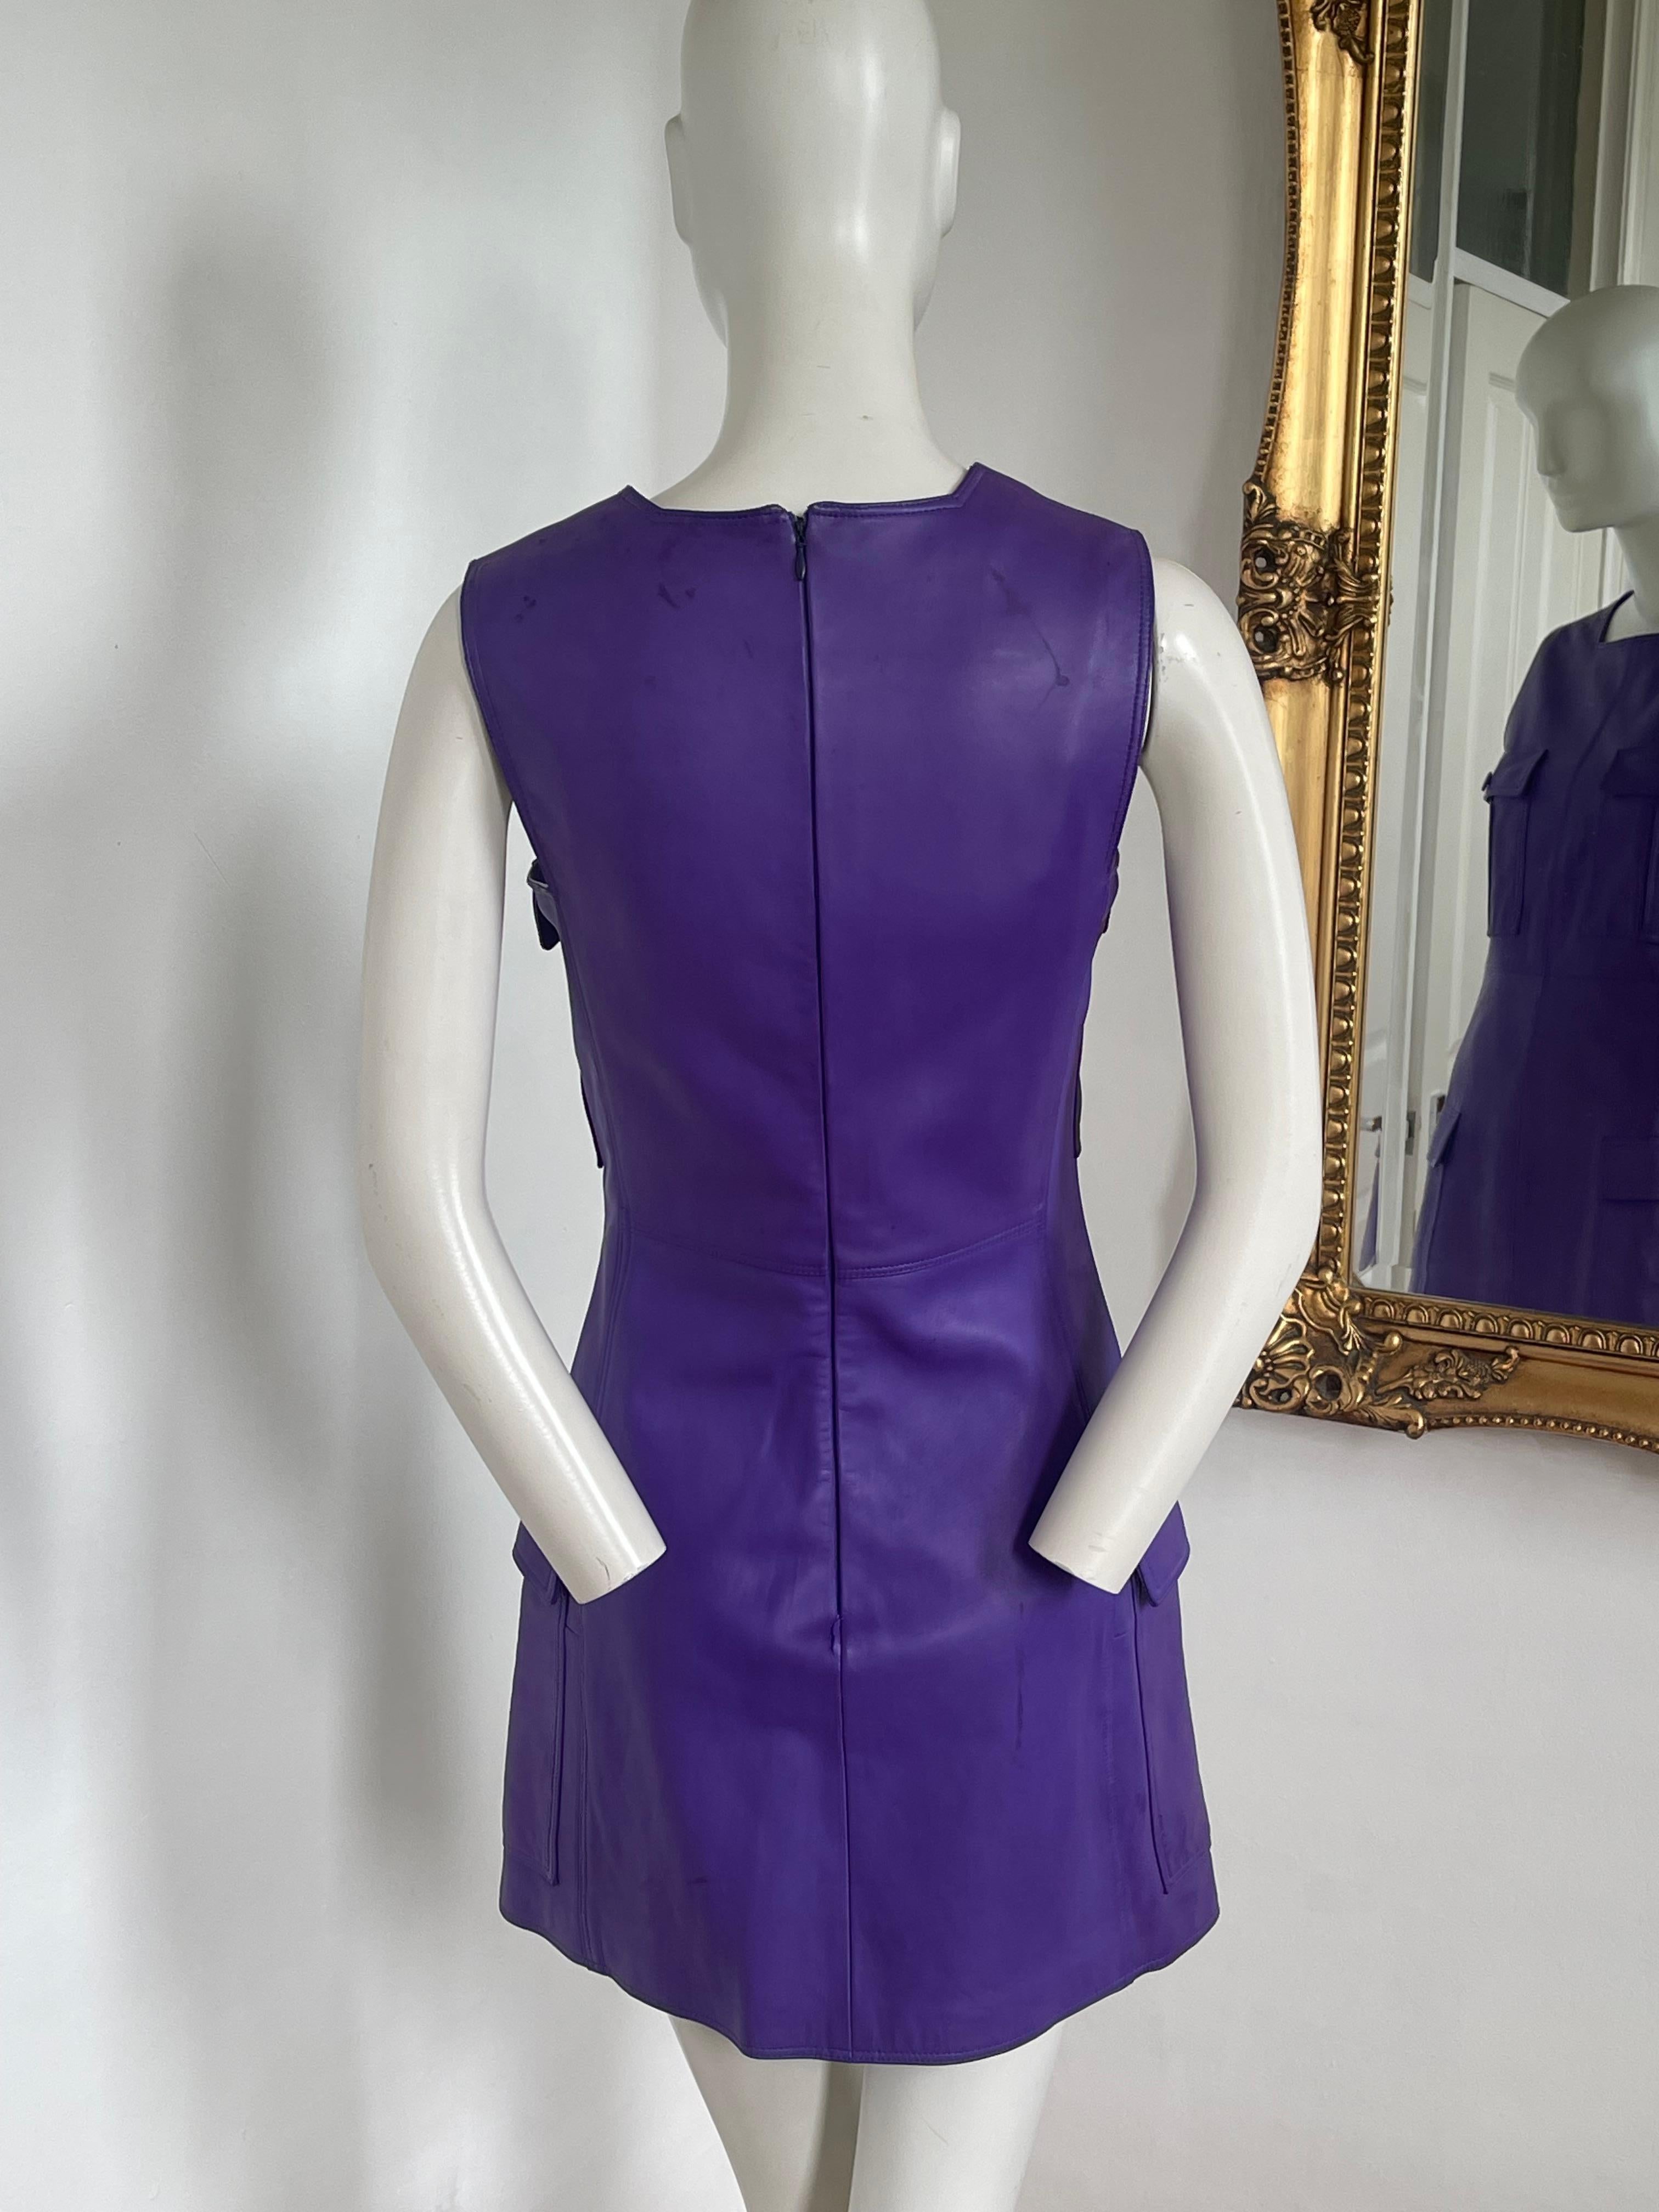 FW 1996 Versace purple leather shift dress with medusa buttons 1